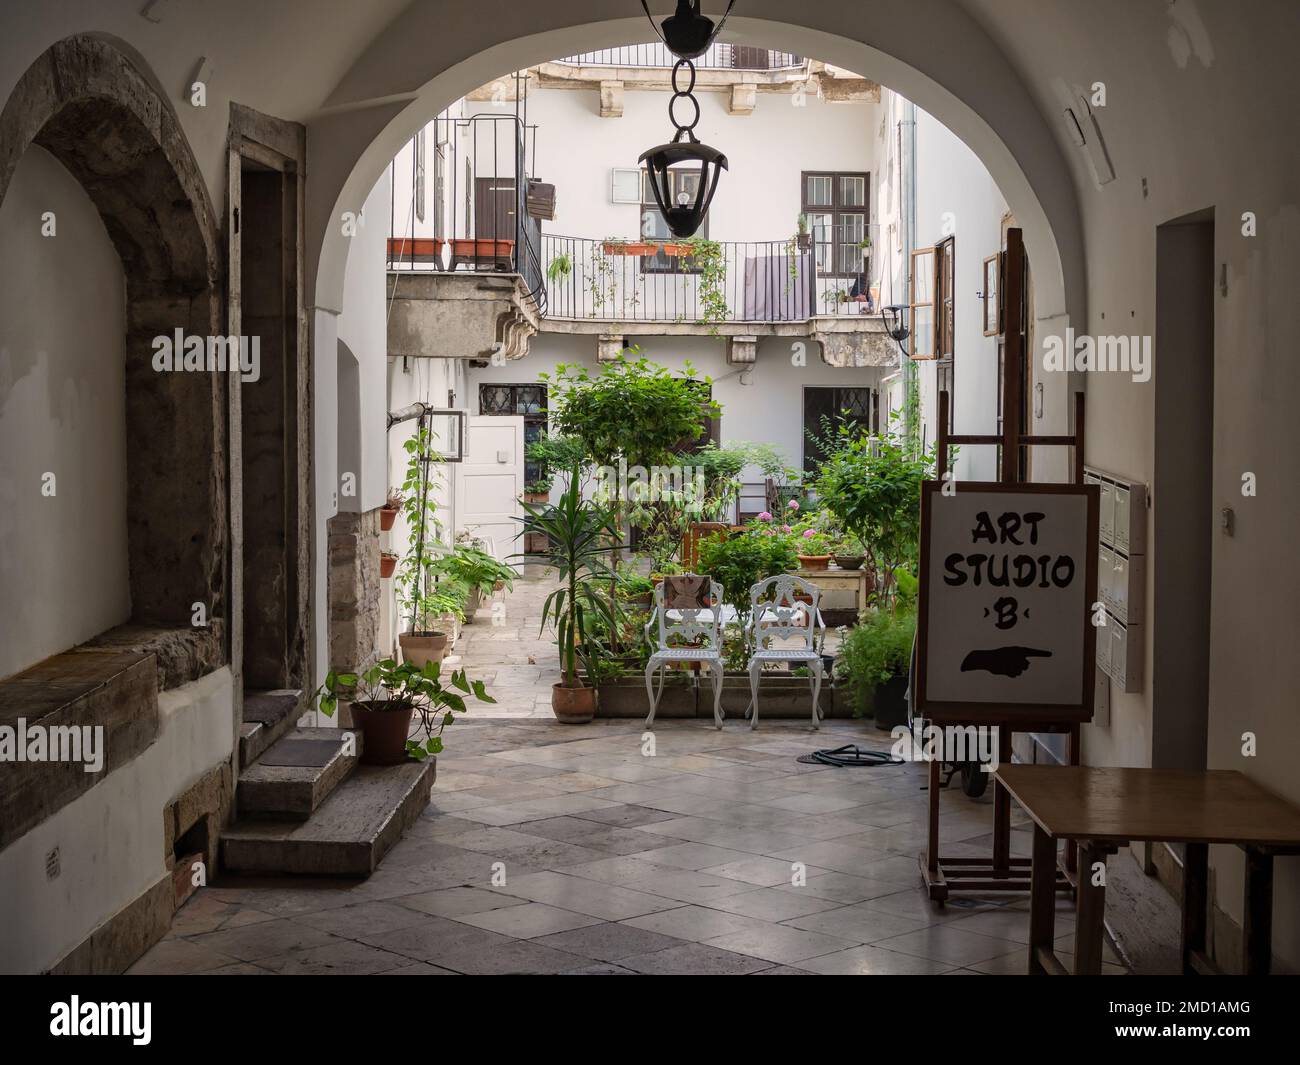 BUDAPEST, HUNGARY -  JULY 16, 2019:  Exterior view of pretty courtyard in central Budapest Stock Photo